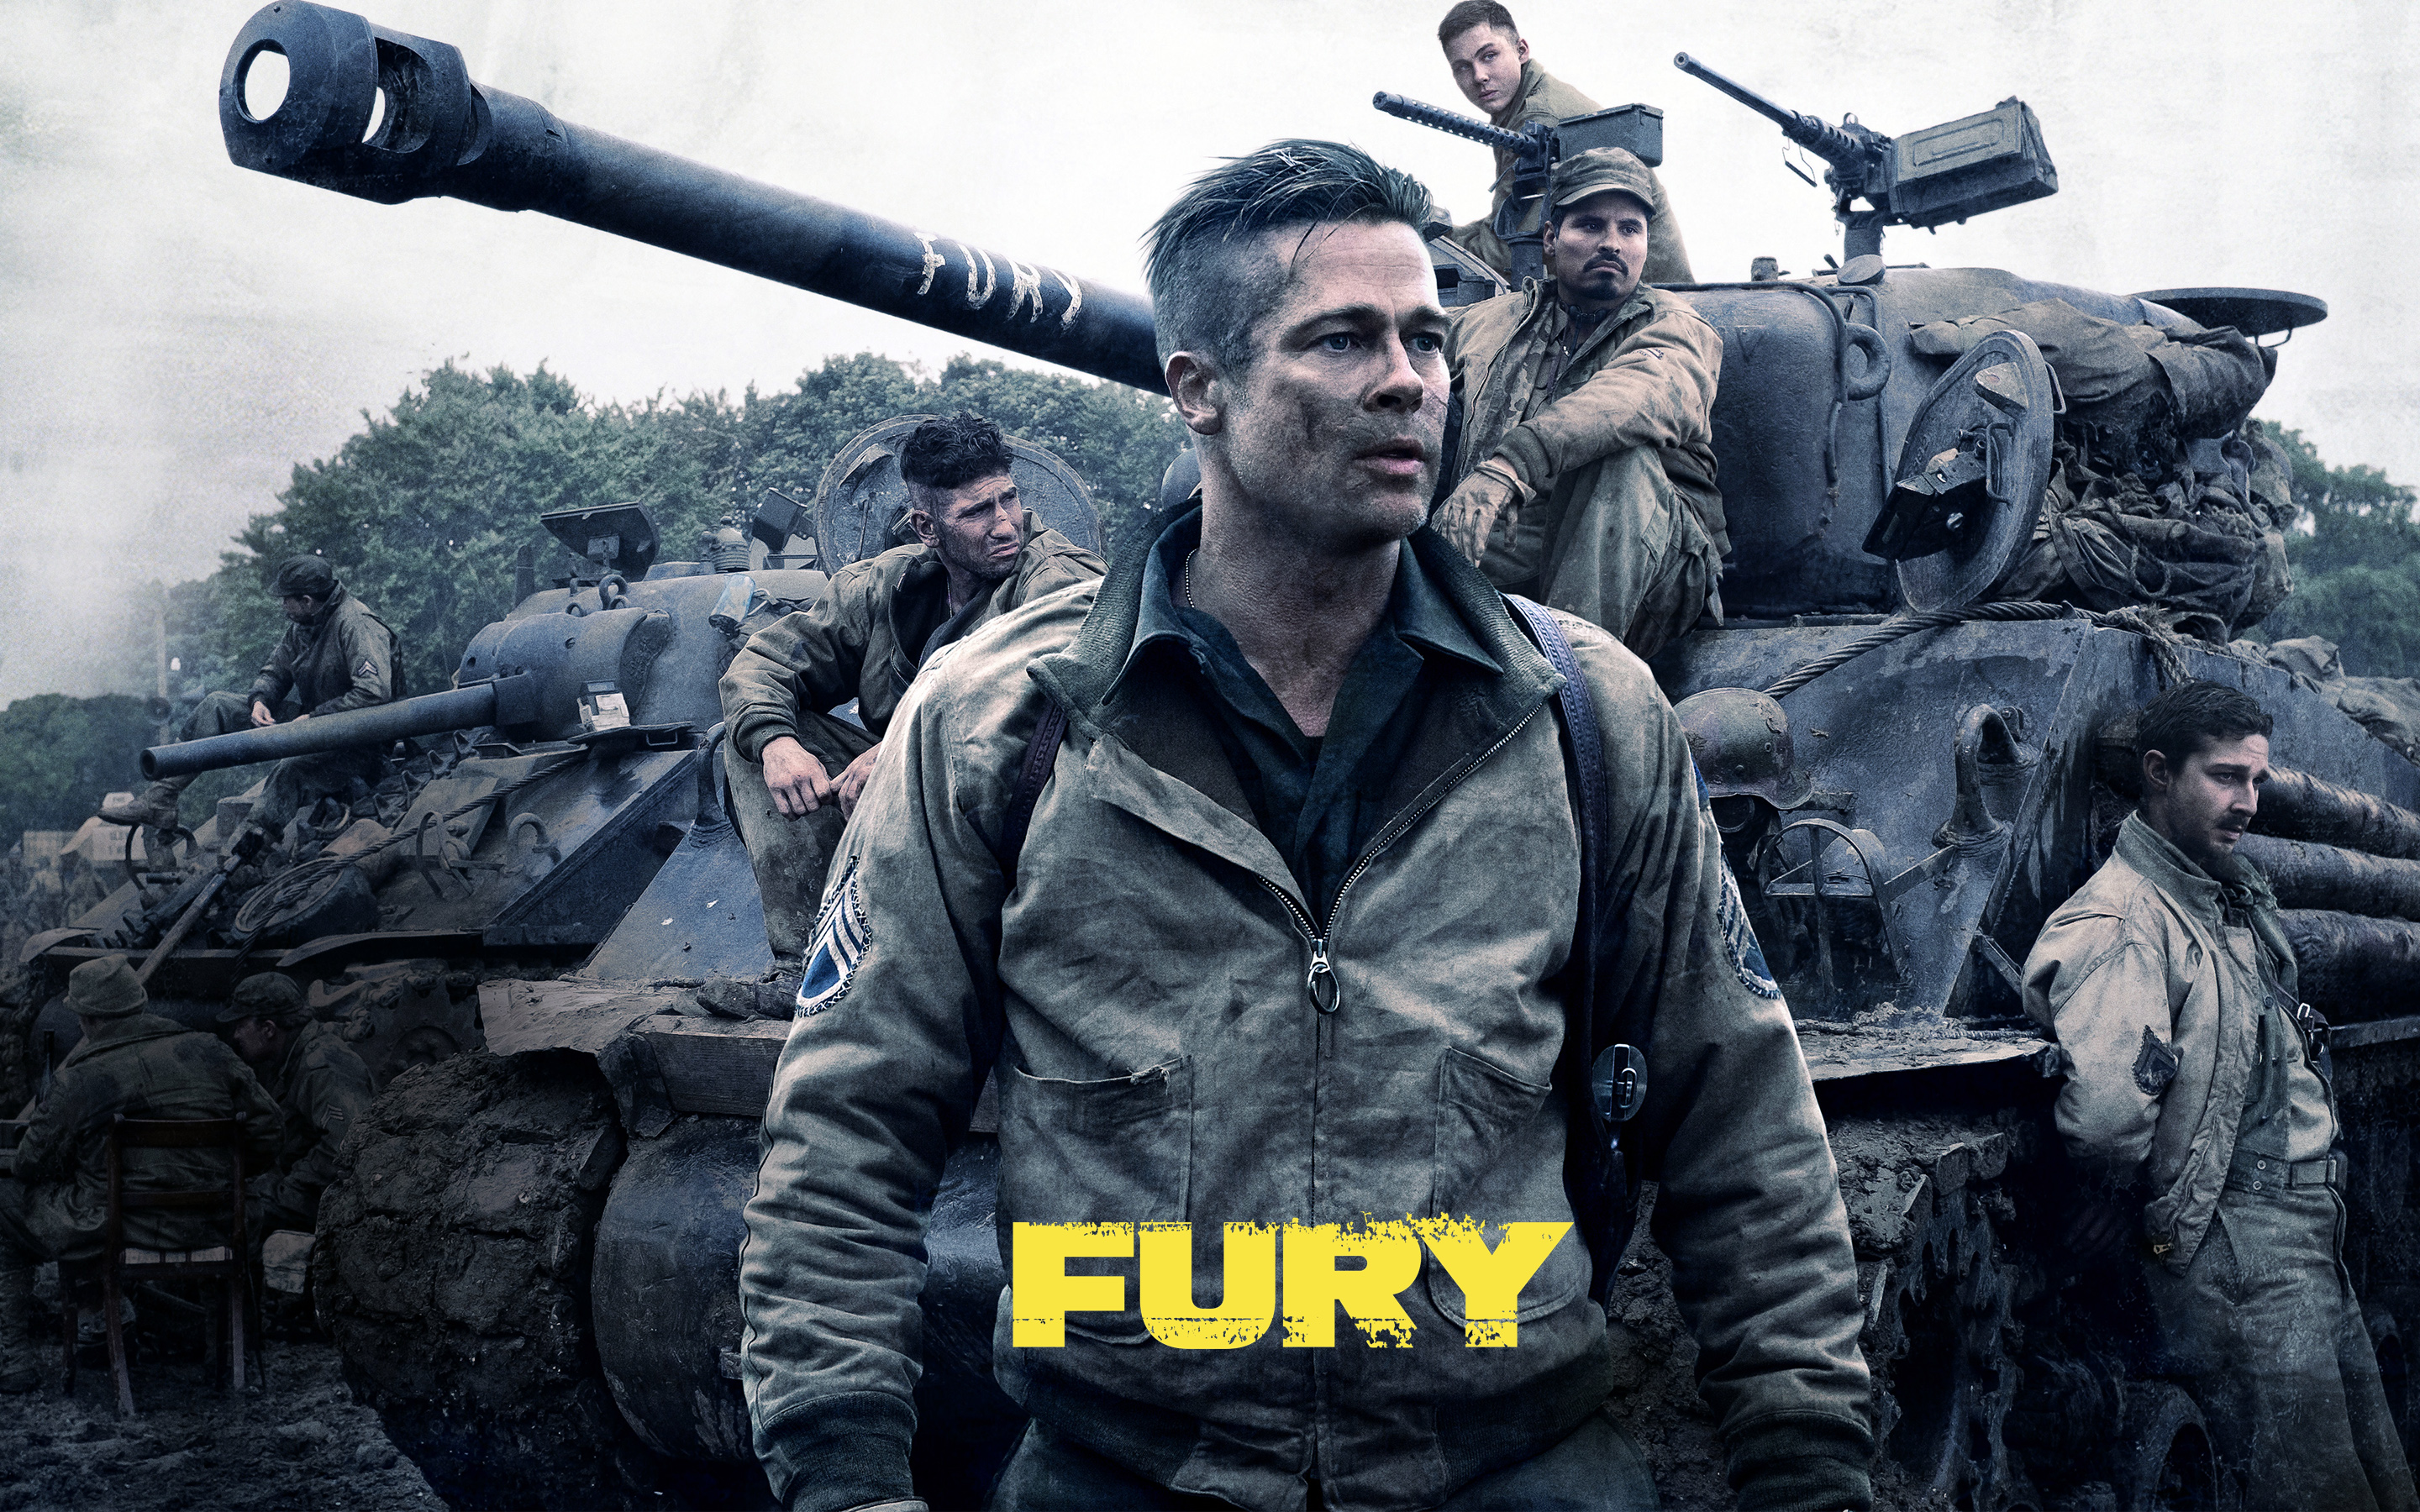 20 Fury HD Wallpapers and Backgrounds